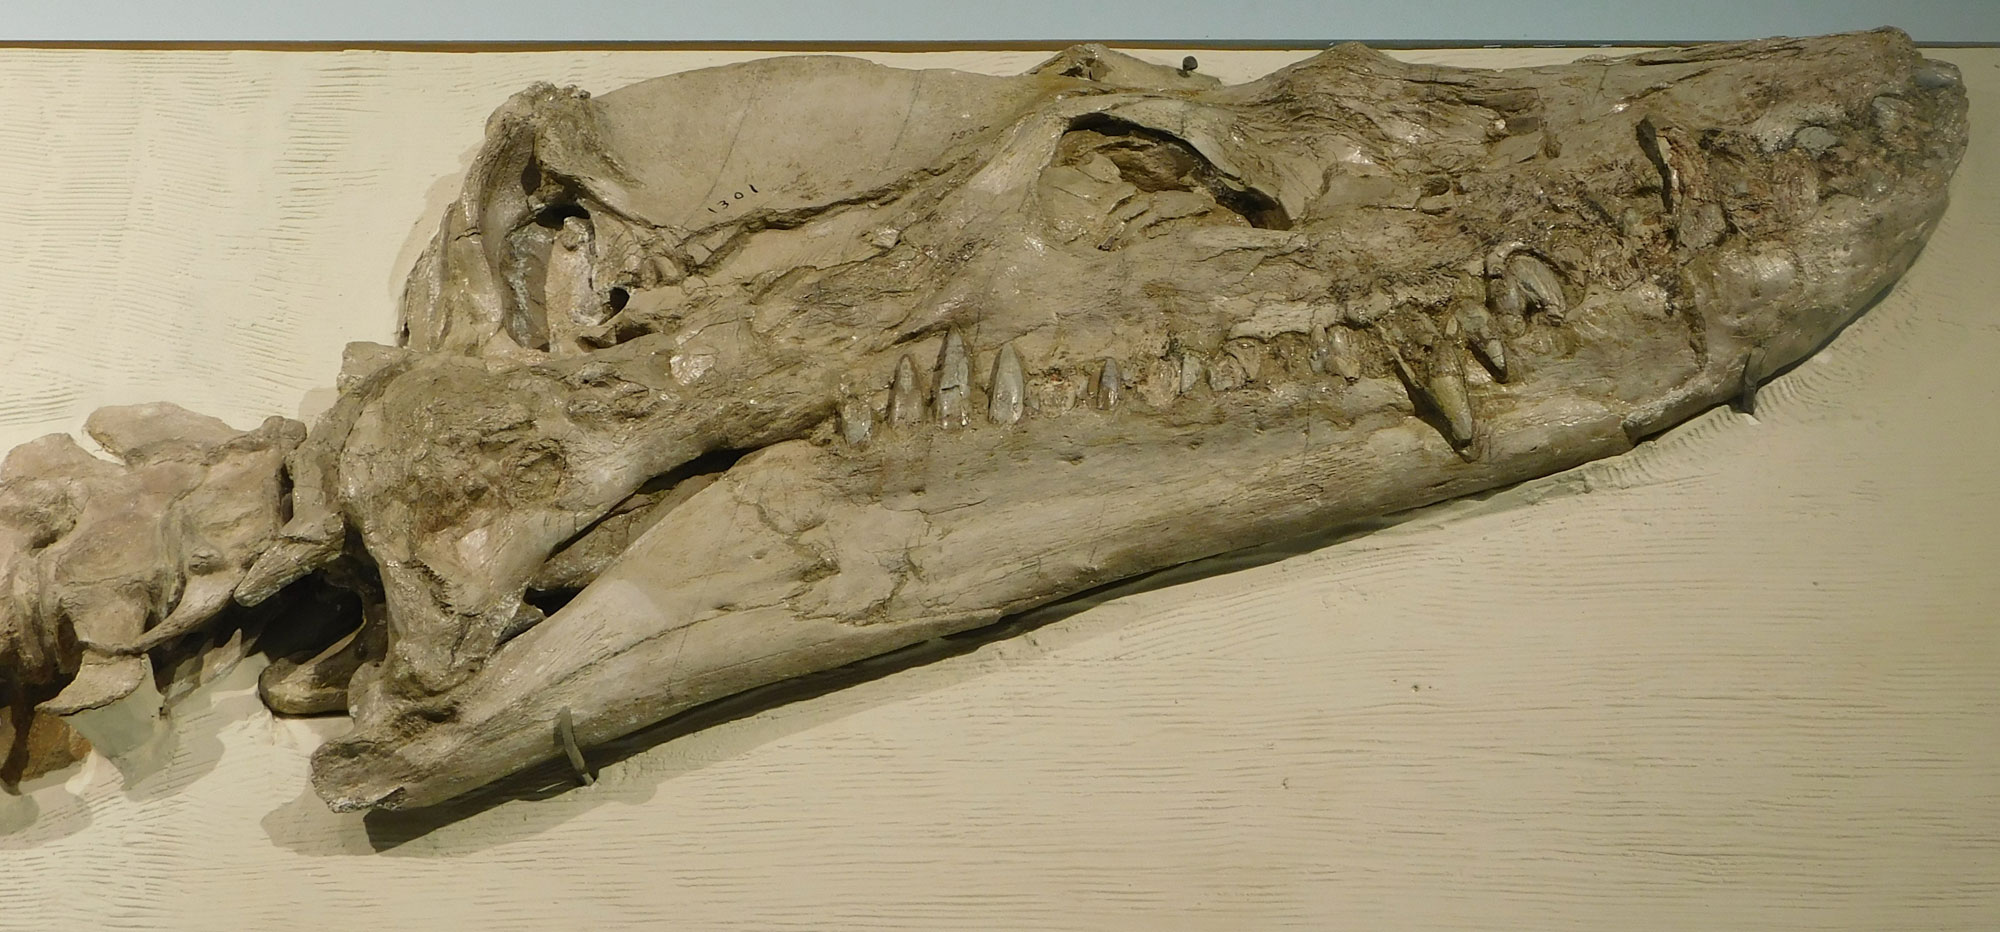 Photo of the skull of the elasmosaur Styxosaurus. Elasmosaurs had long necks and four paddle-like legs. The skull has pointed teeth that overlap the jaws when the mouth is shut.